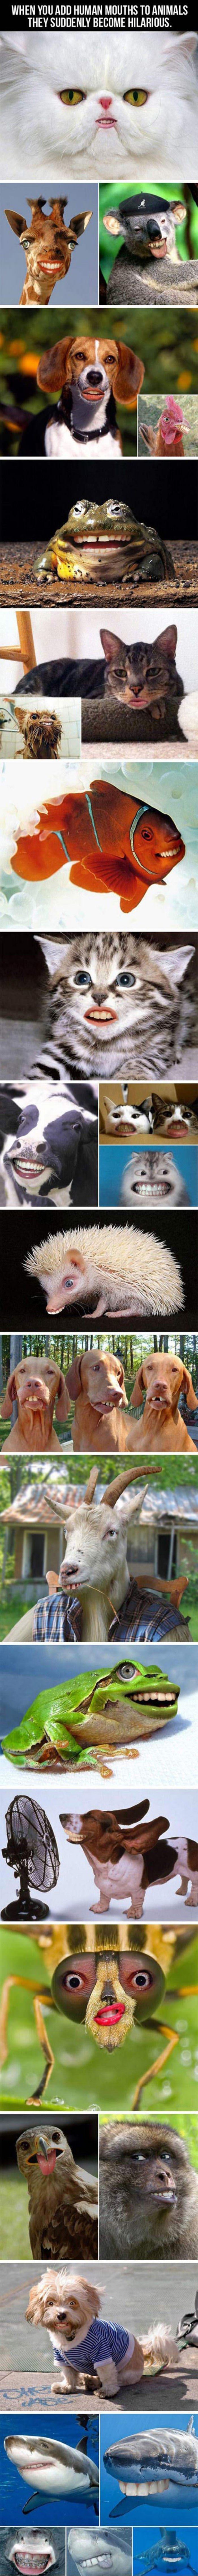 animals with human mouths funny picture